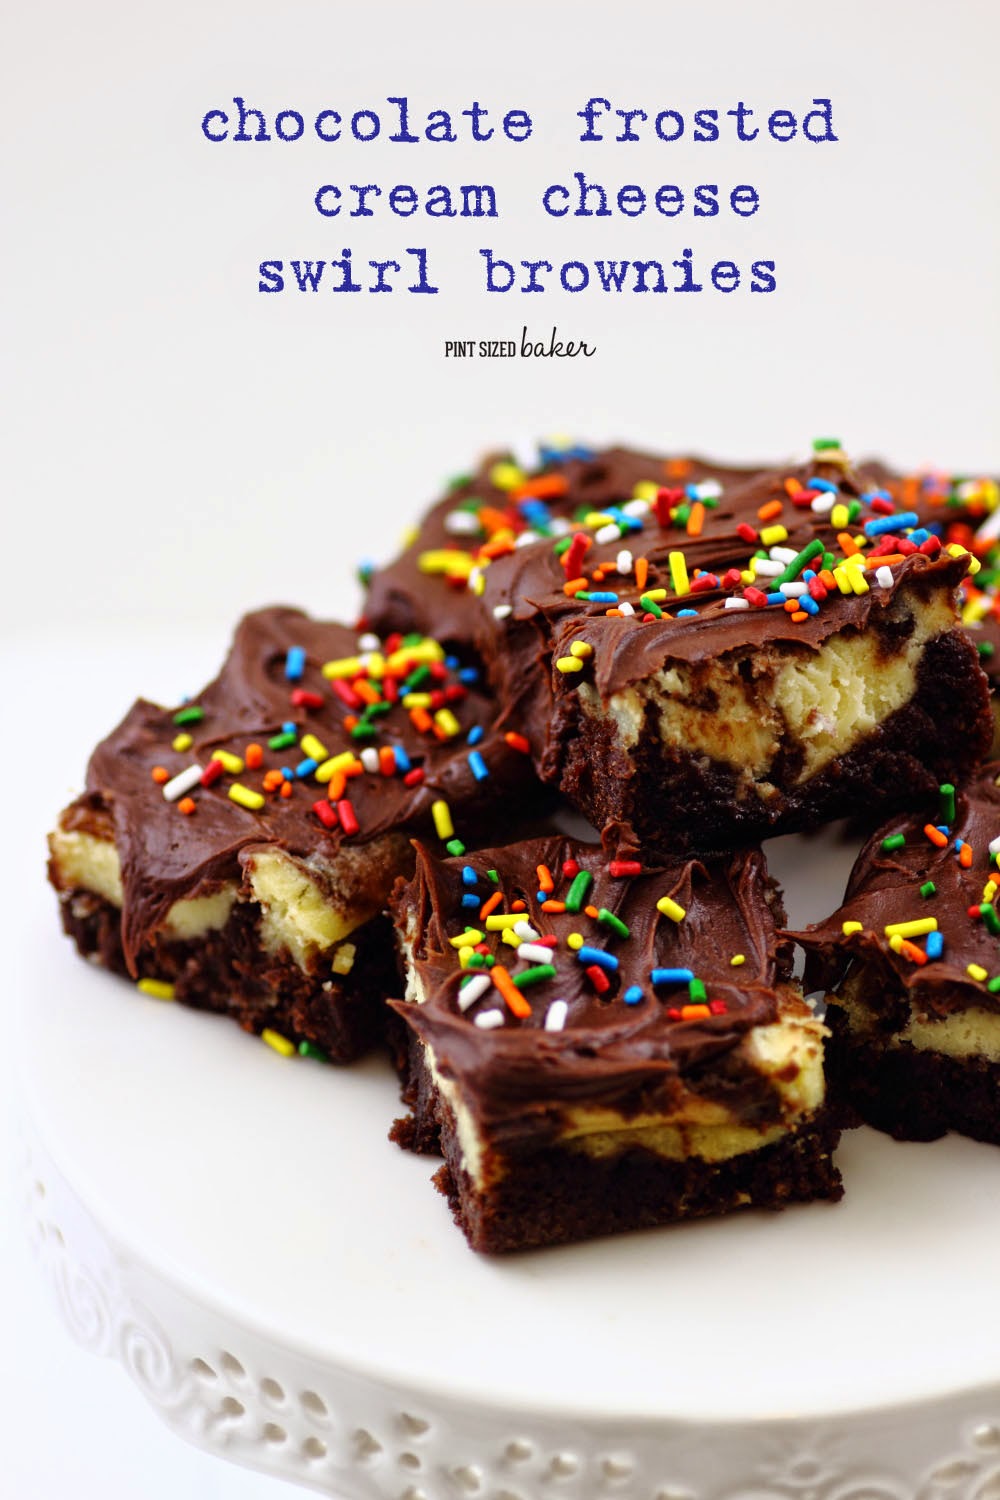 Chocolate Frosted Cheesecake Swirled Brownies. Covered in Rainbow Sprinkles- kids of all ages will love them!